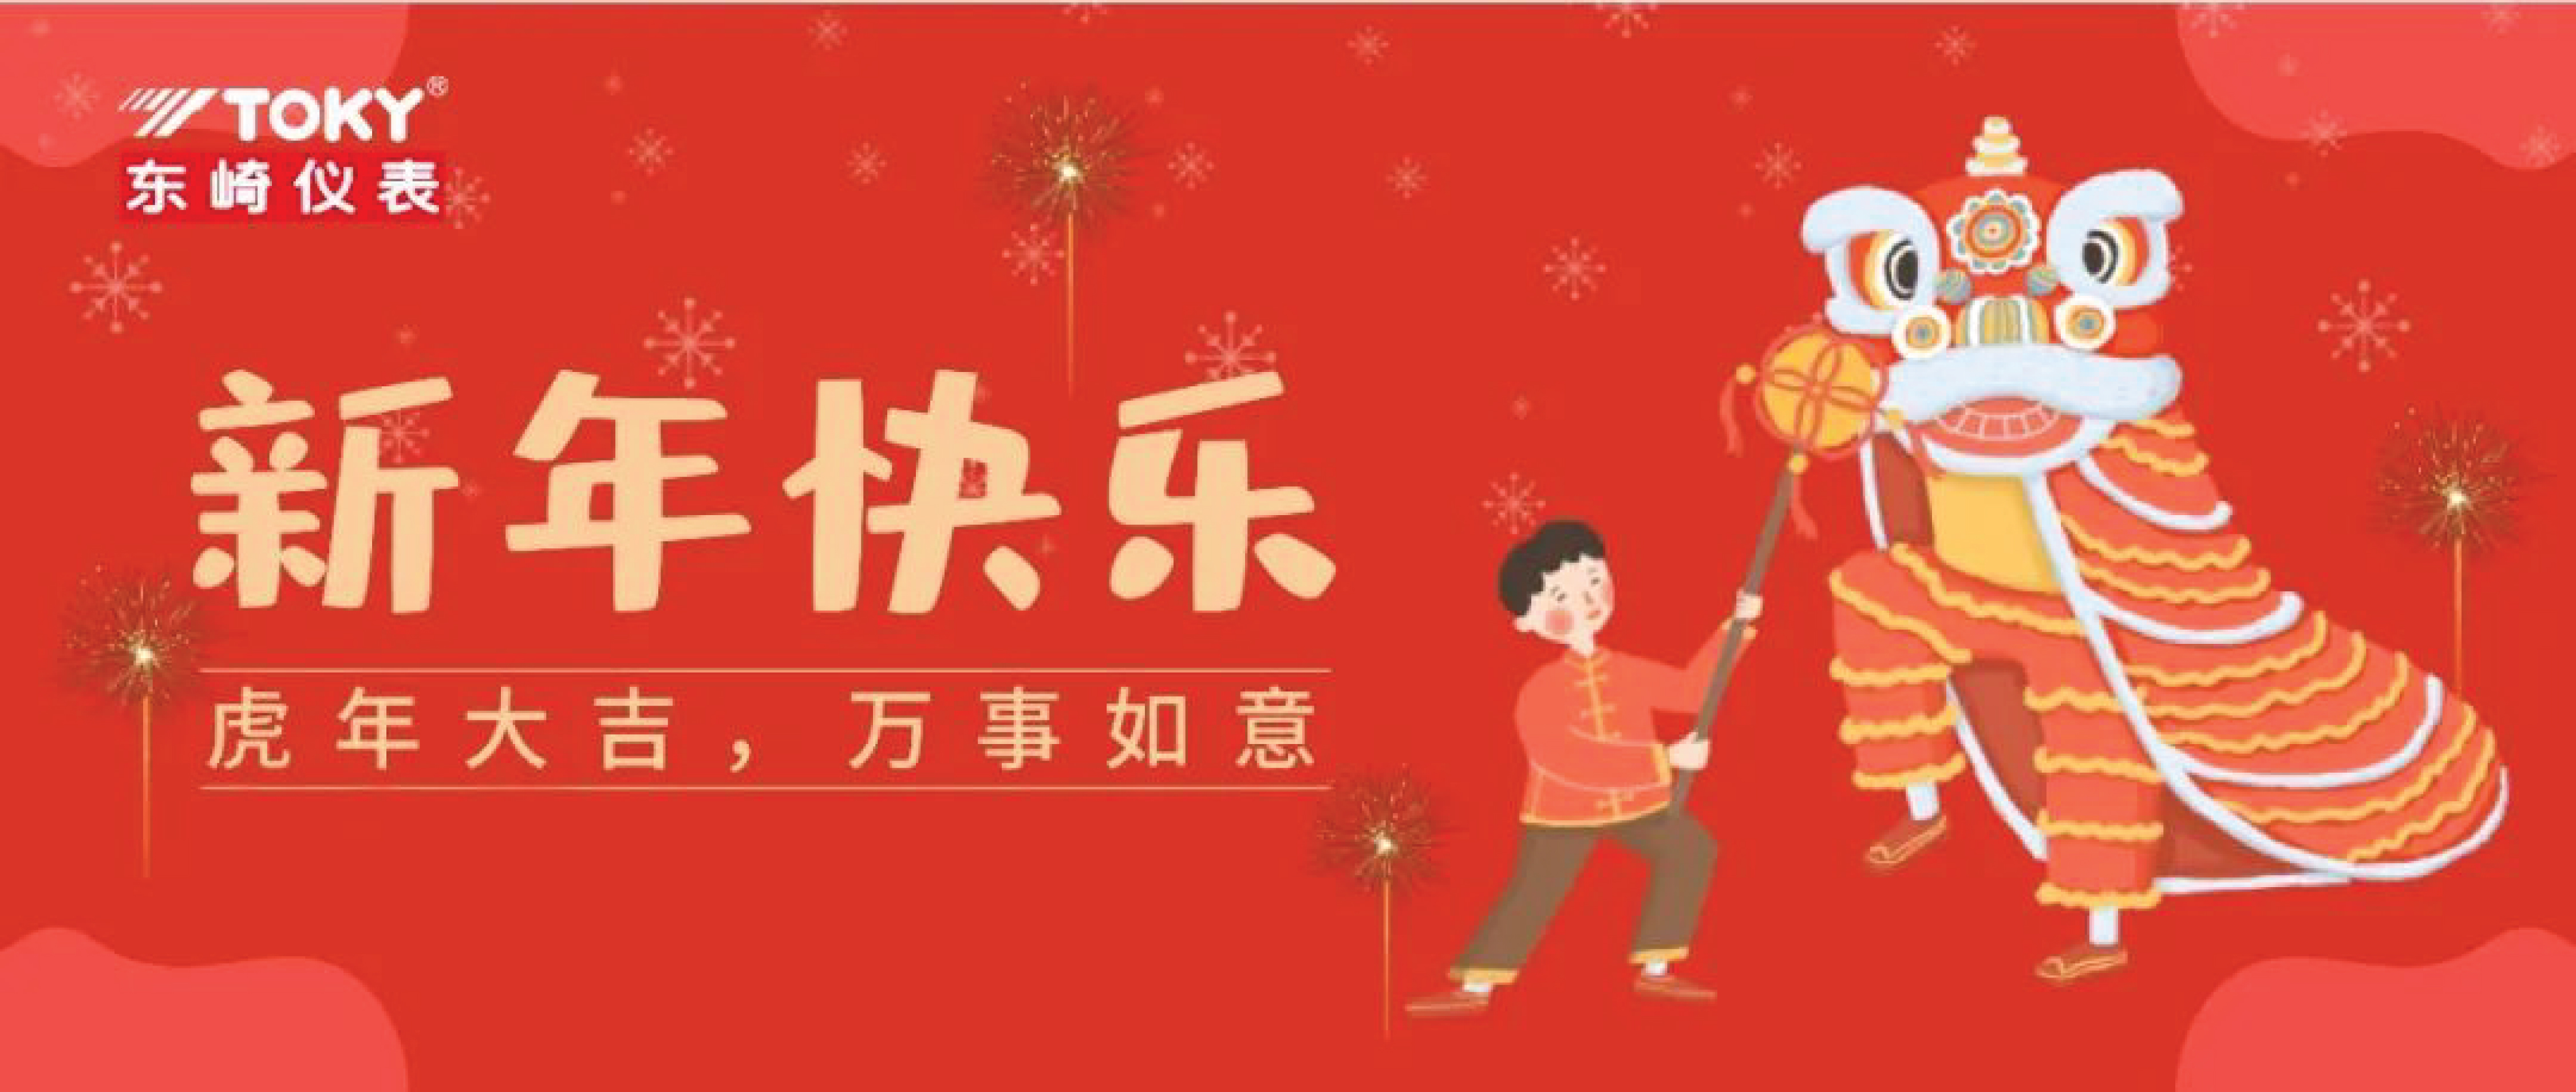 Toky Electric Co., Ltd. wishes everyone a Happy New Year!